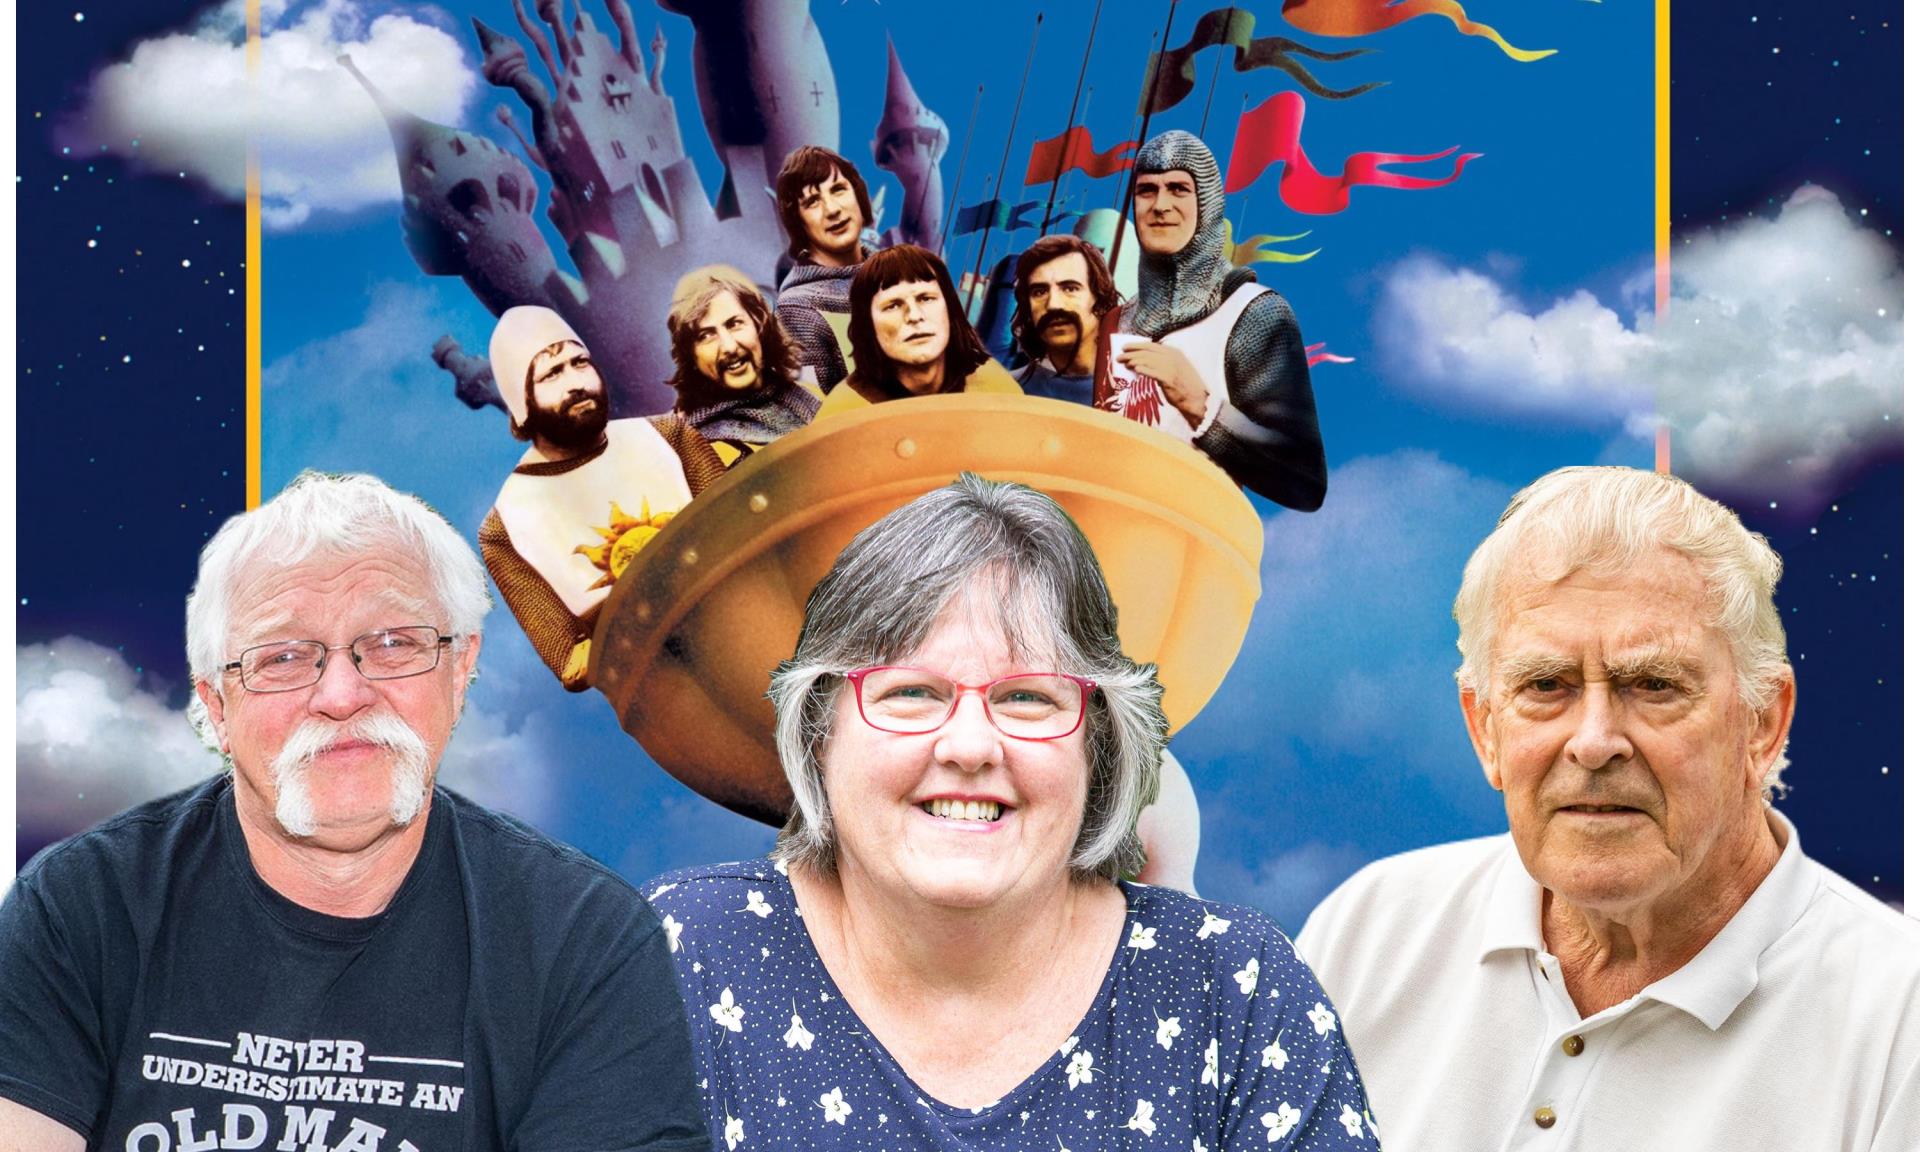 Harry Doy, Gwen MacKenzie and Jack McGregor recall their memories of filming Monty Python and the Holy Grail.